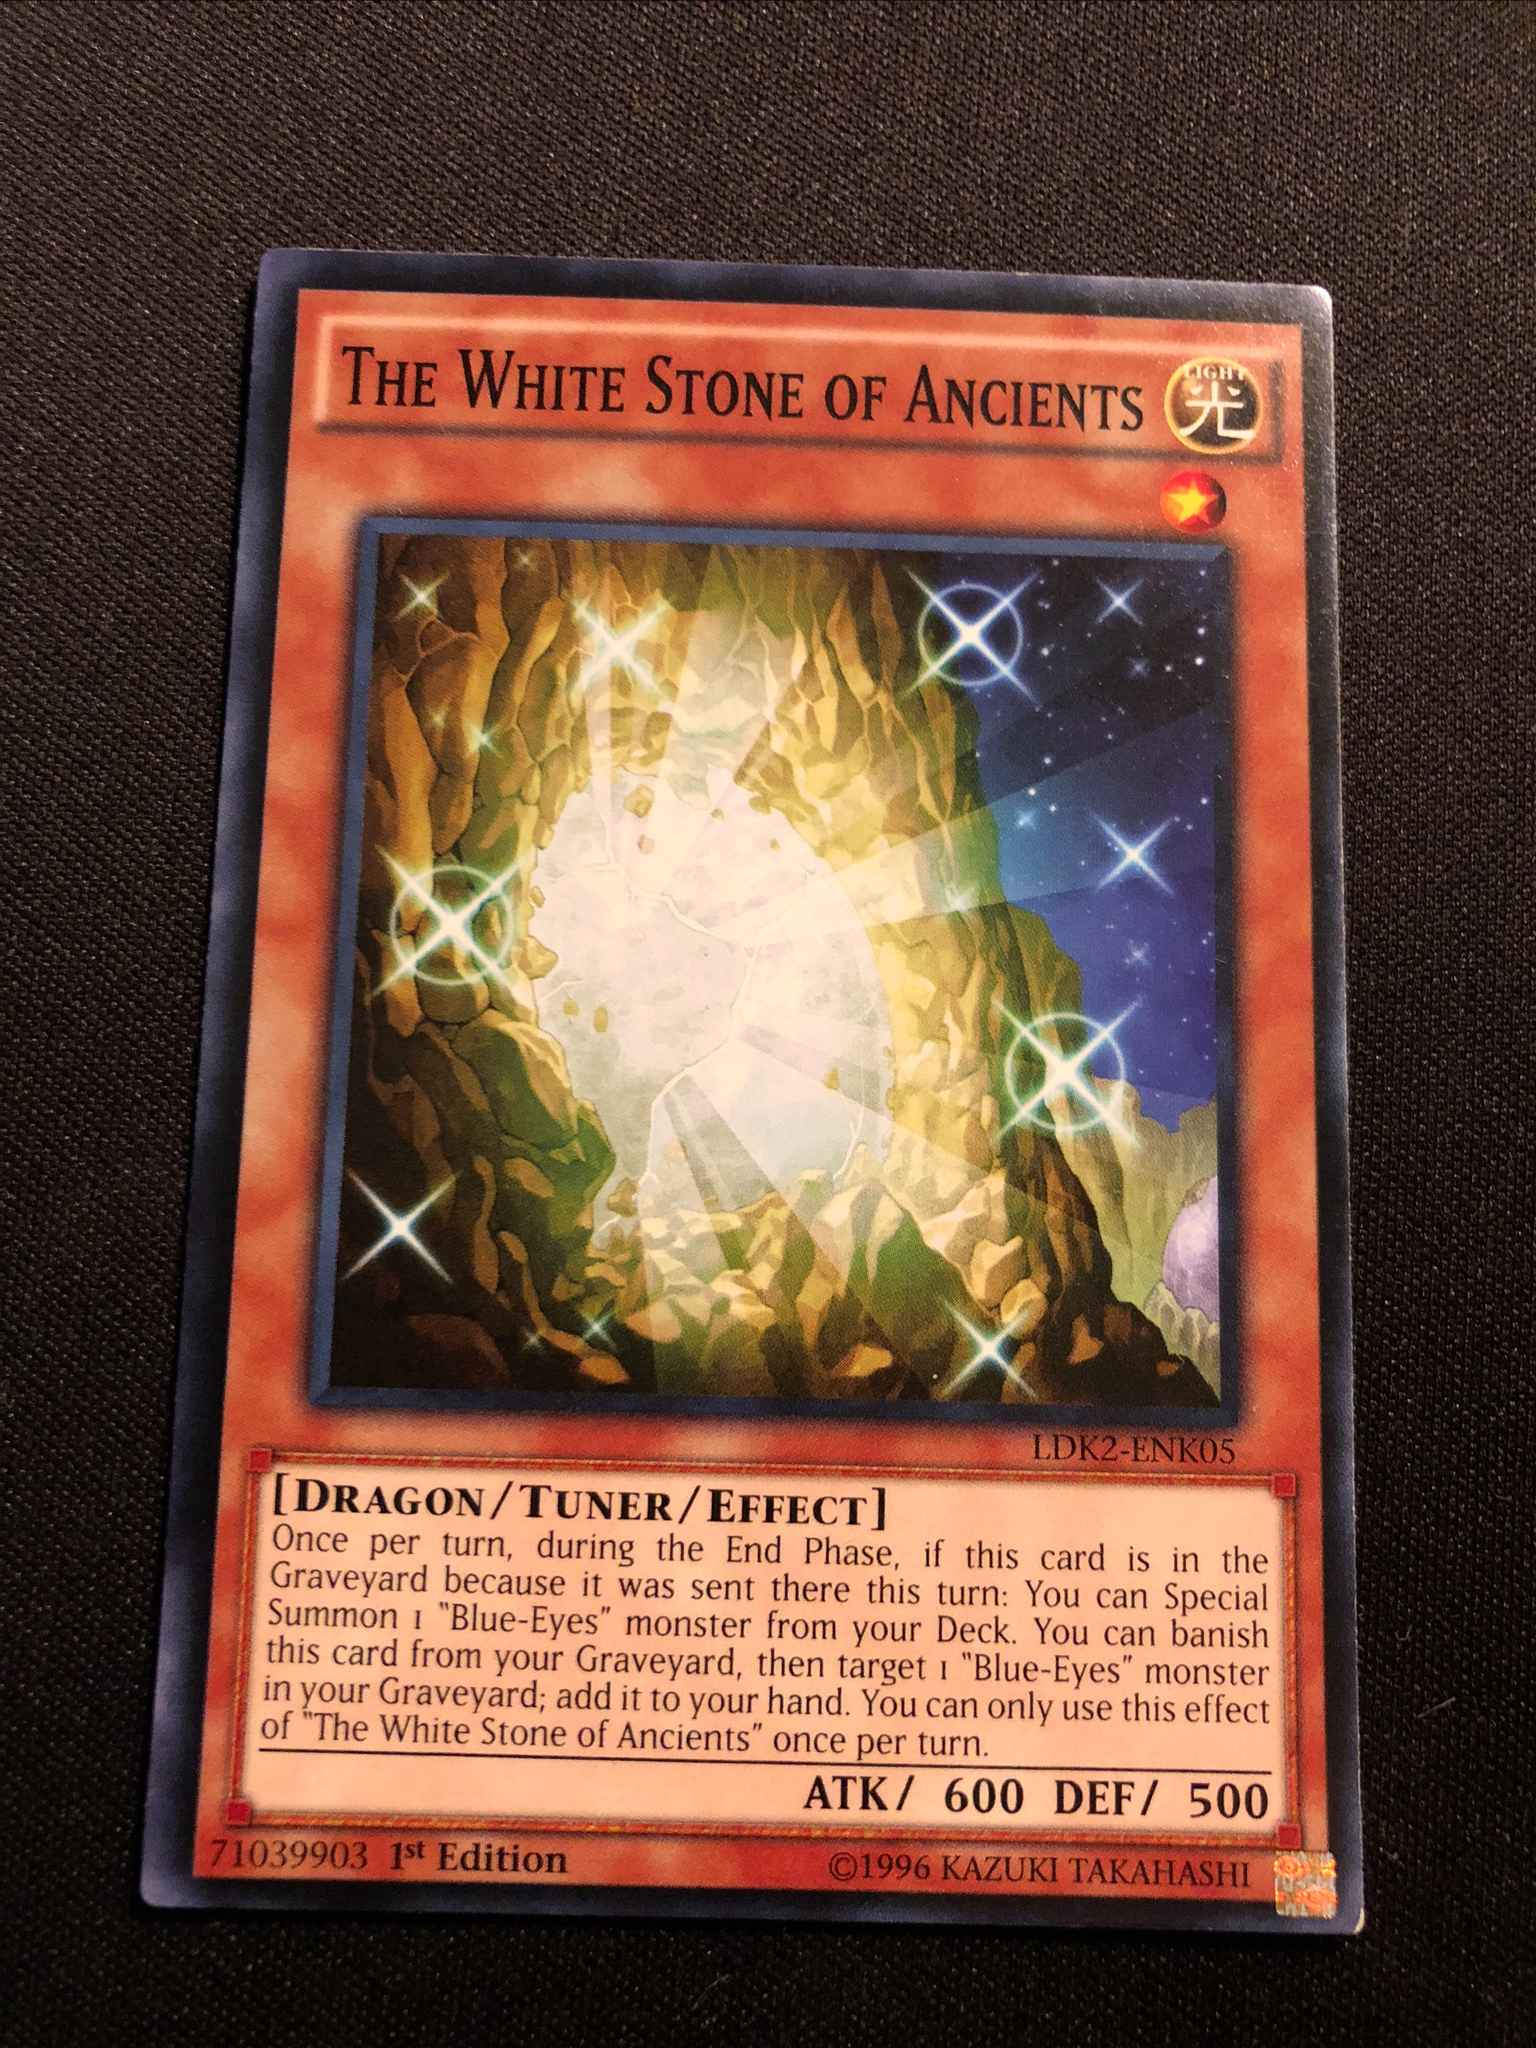 Yugioh Common The White Stone Of Ancients LDK2-ENK05